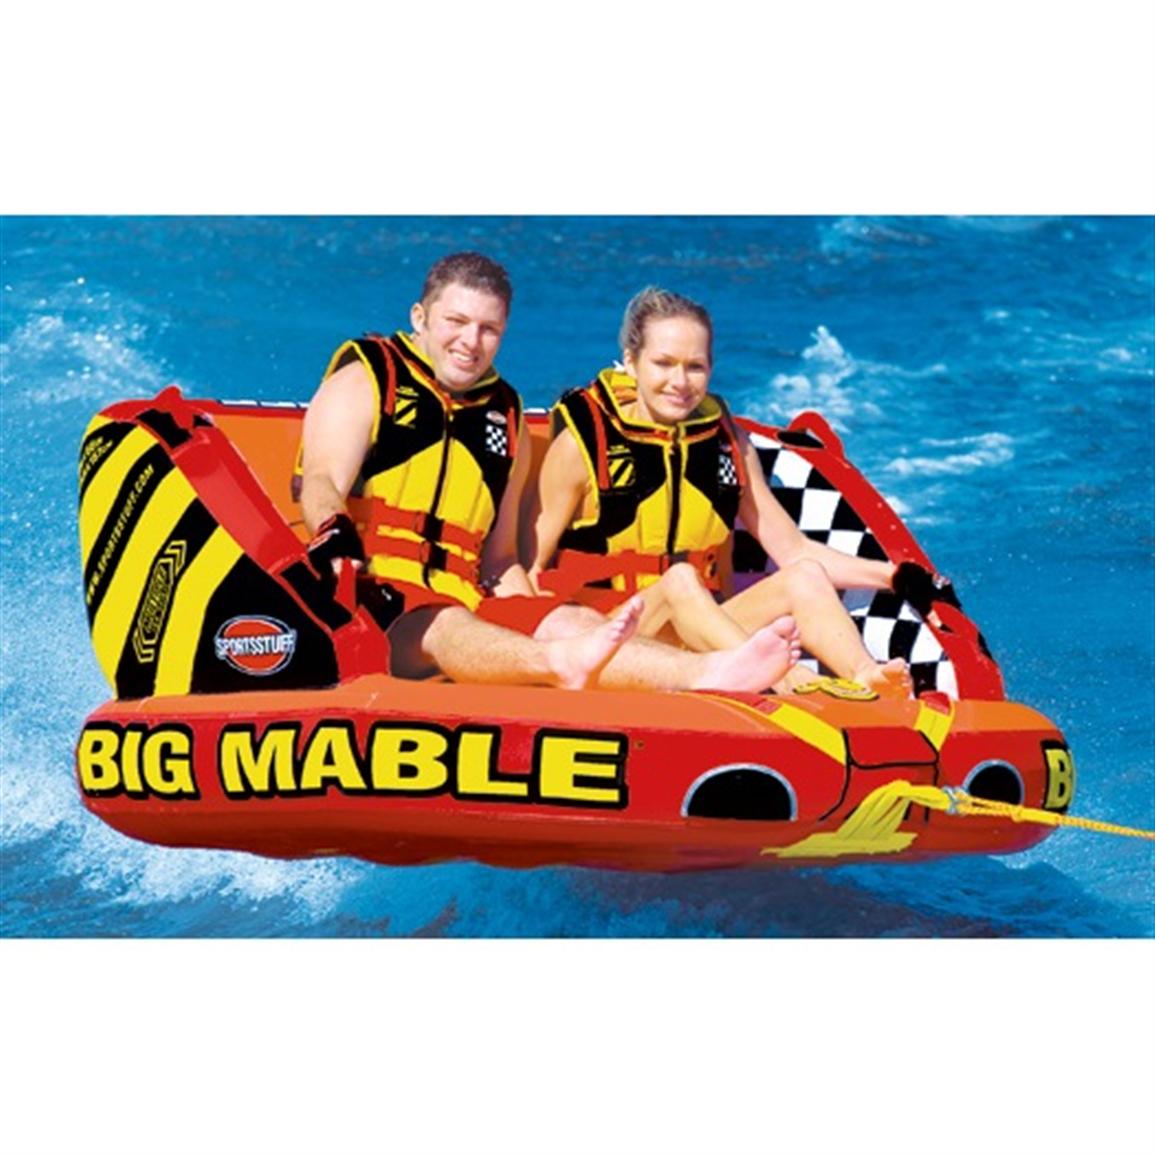 Sportsstuff® Big Mable 2-person Towable